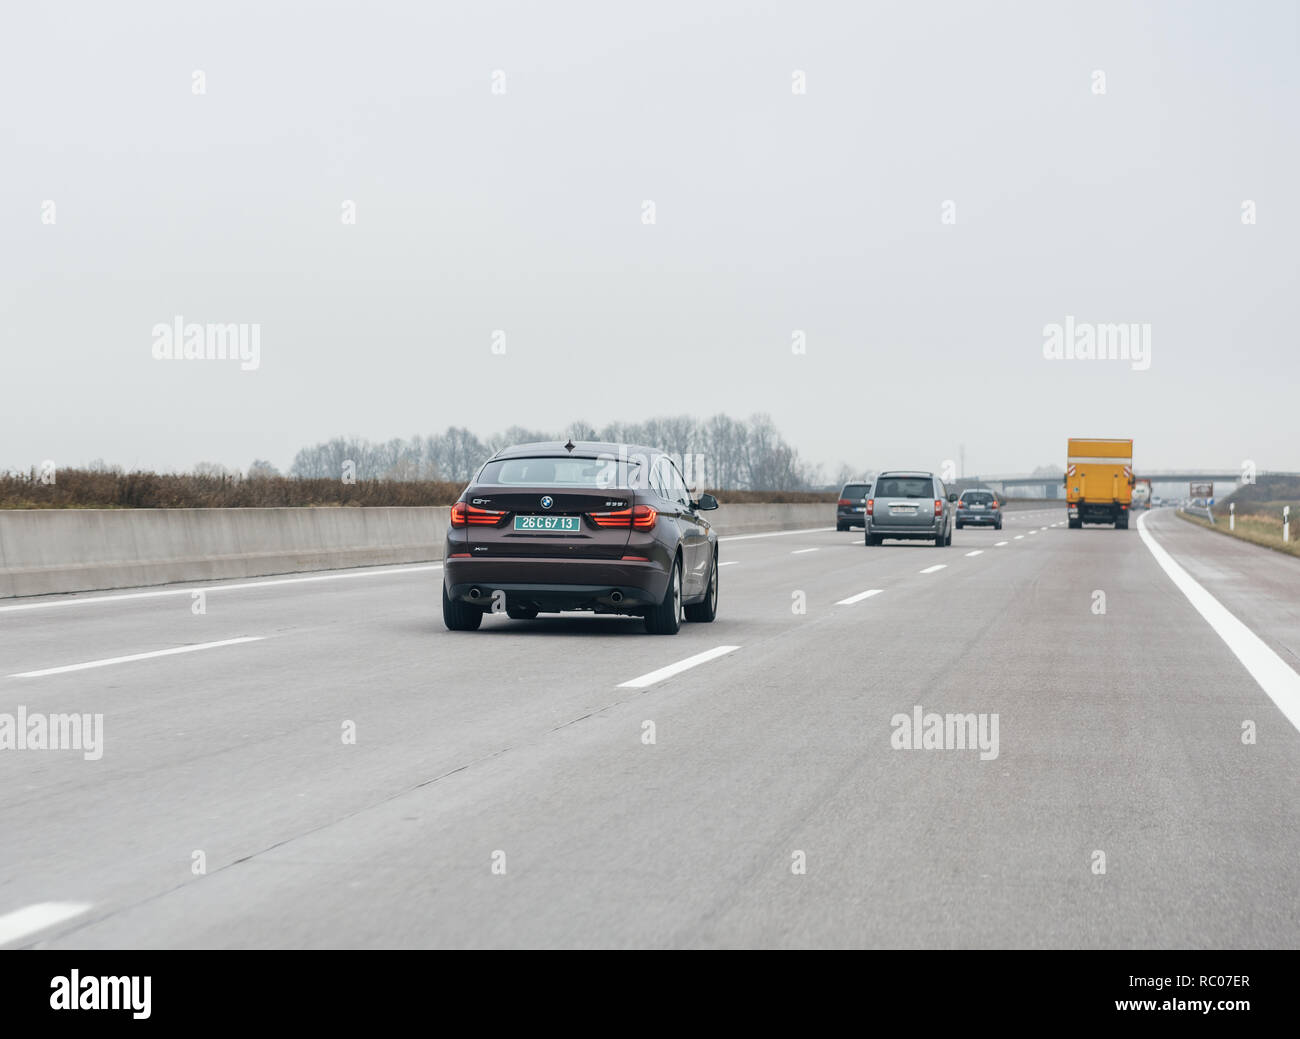 FRANKFURT, GERMANY - FEB 18, 2018: Driver POV personal perspective toward the driving BMW 535i GT luxury purple red car on the autobahn highway  Stock Photo